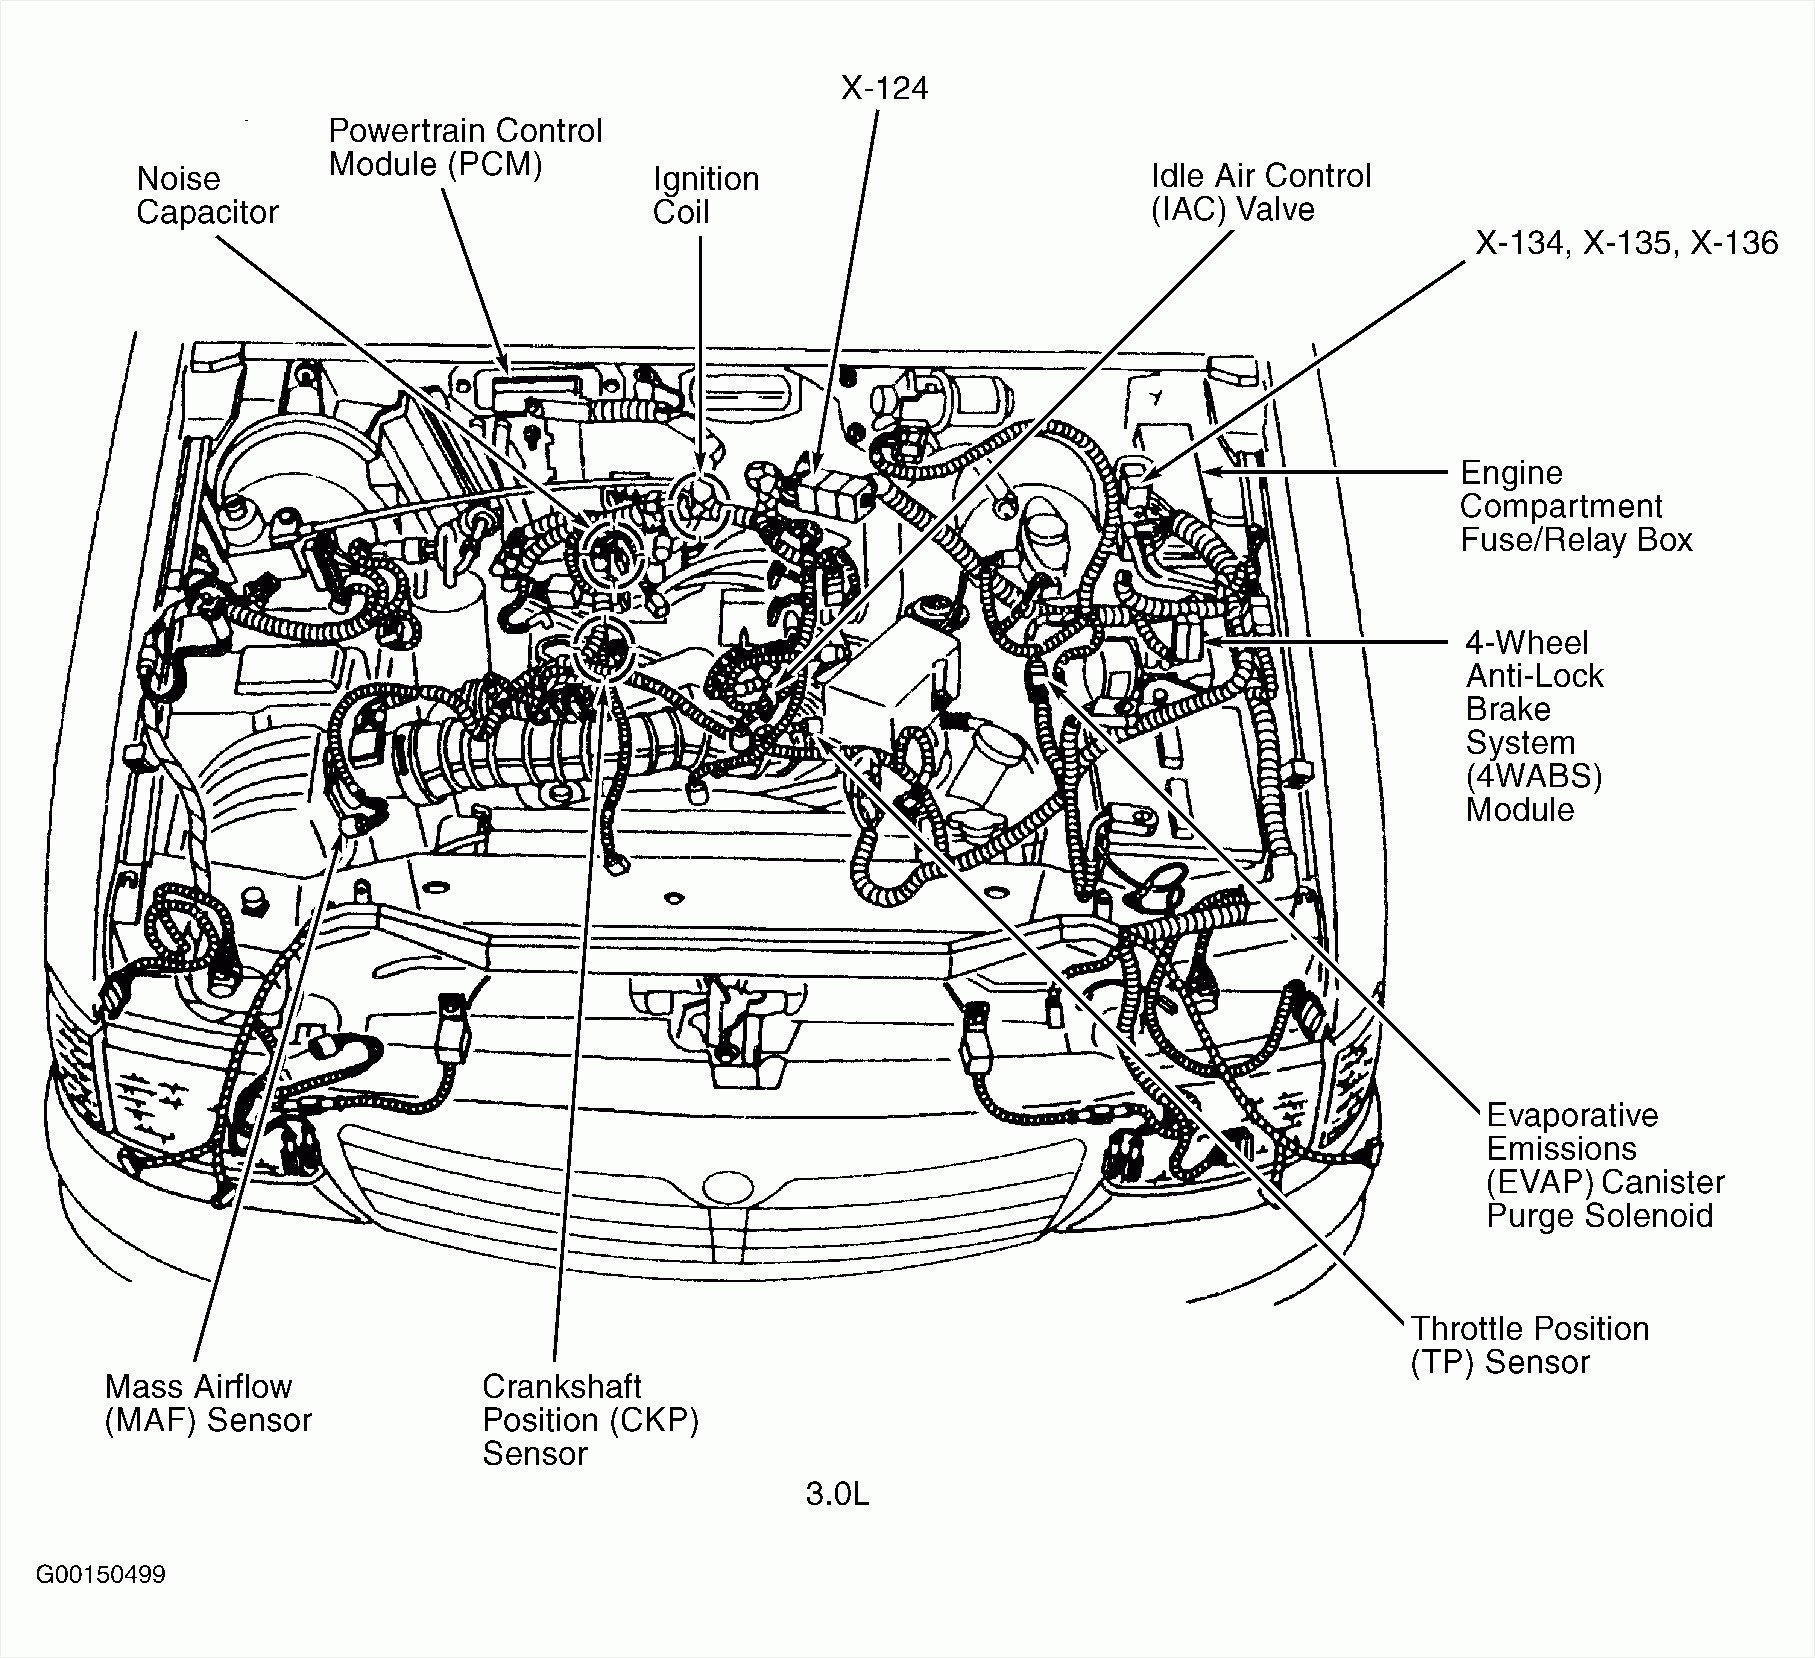 1995 Mazda 626 Engine Diagram Take A Look About Mazda 626 1999 with Exciting Gallery Of 1995 Mazda 626 Engine Diagram